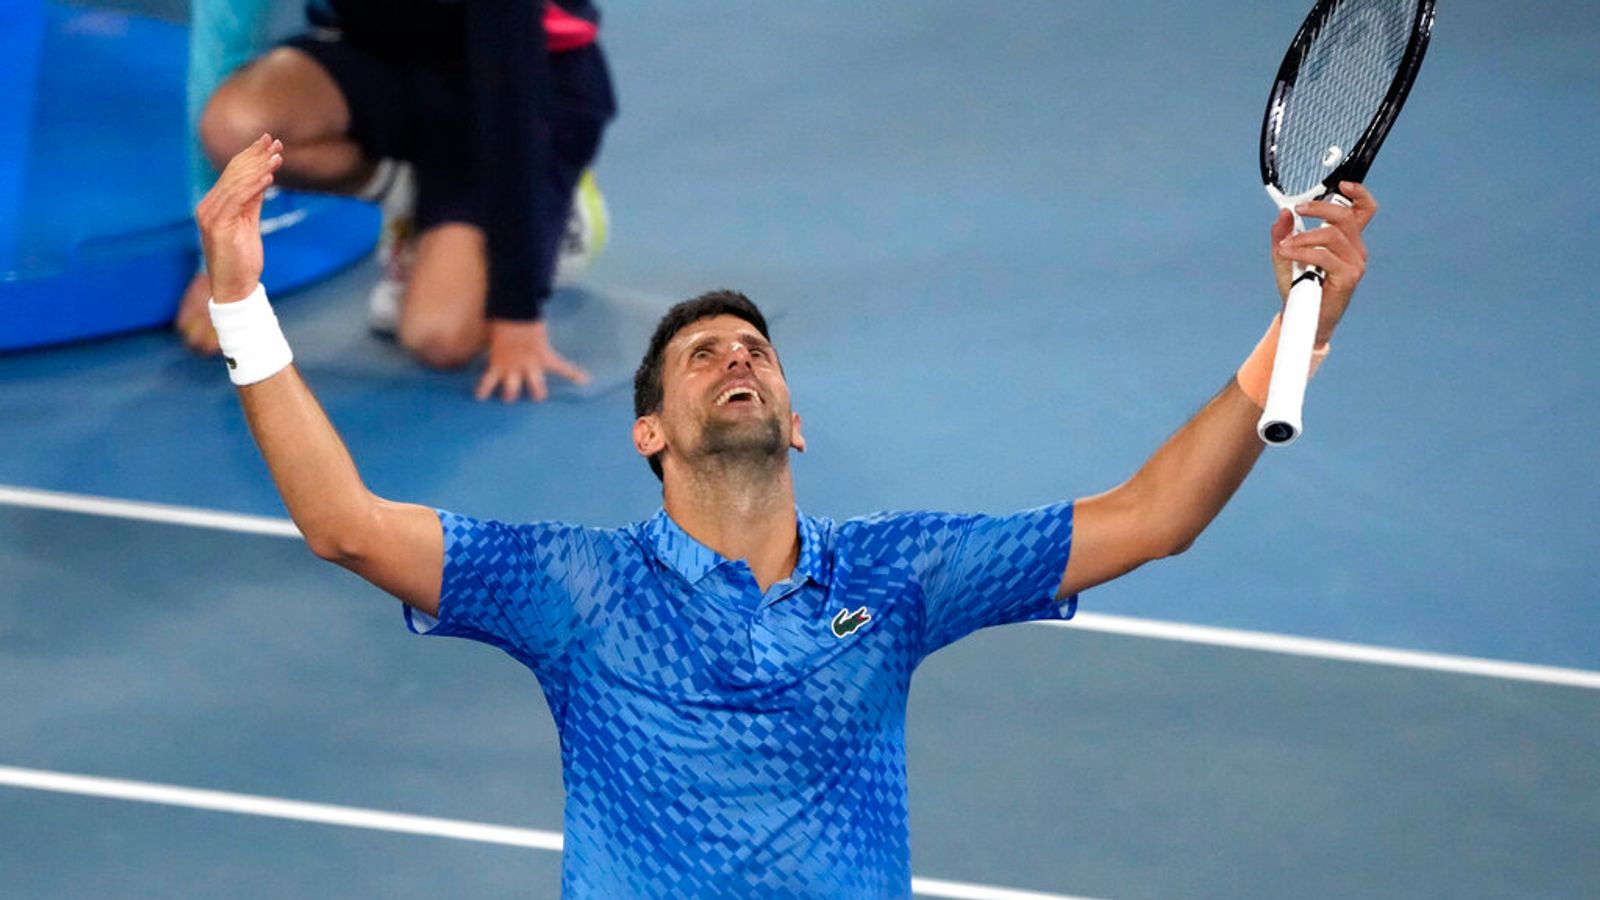 Djokovic wins Australian Open a year after deportation - equals Nadal's Grand Slam record